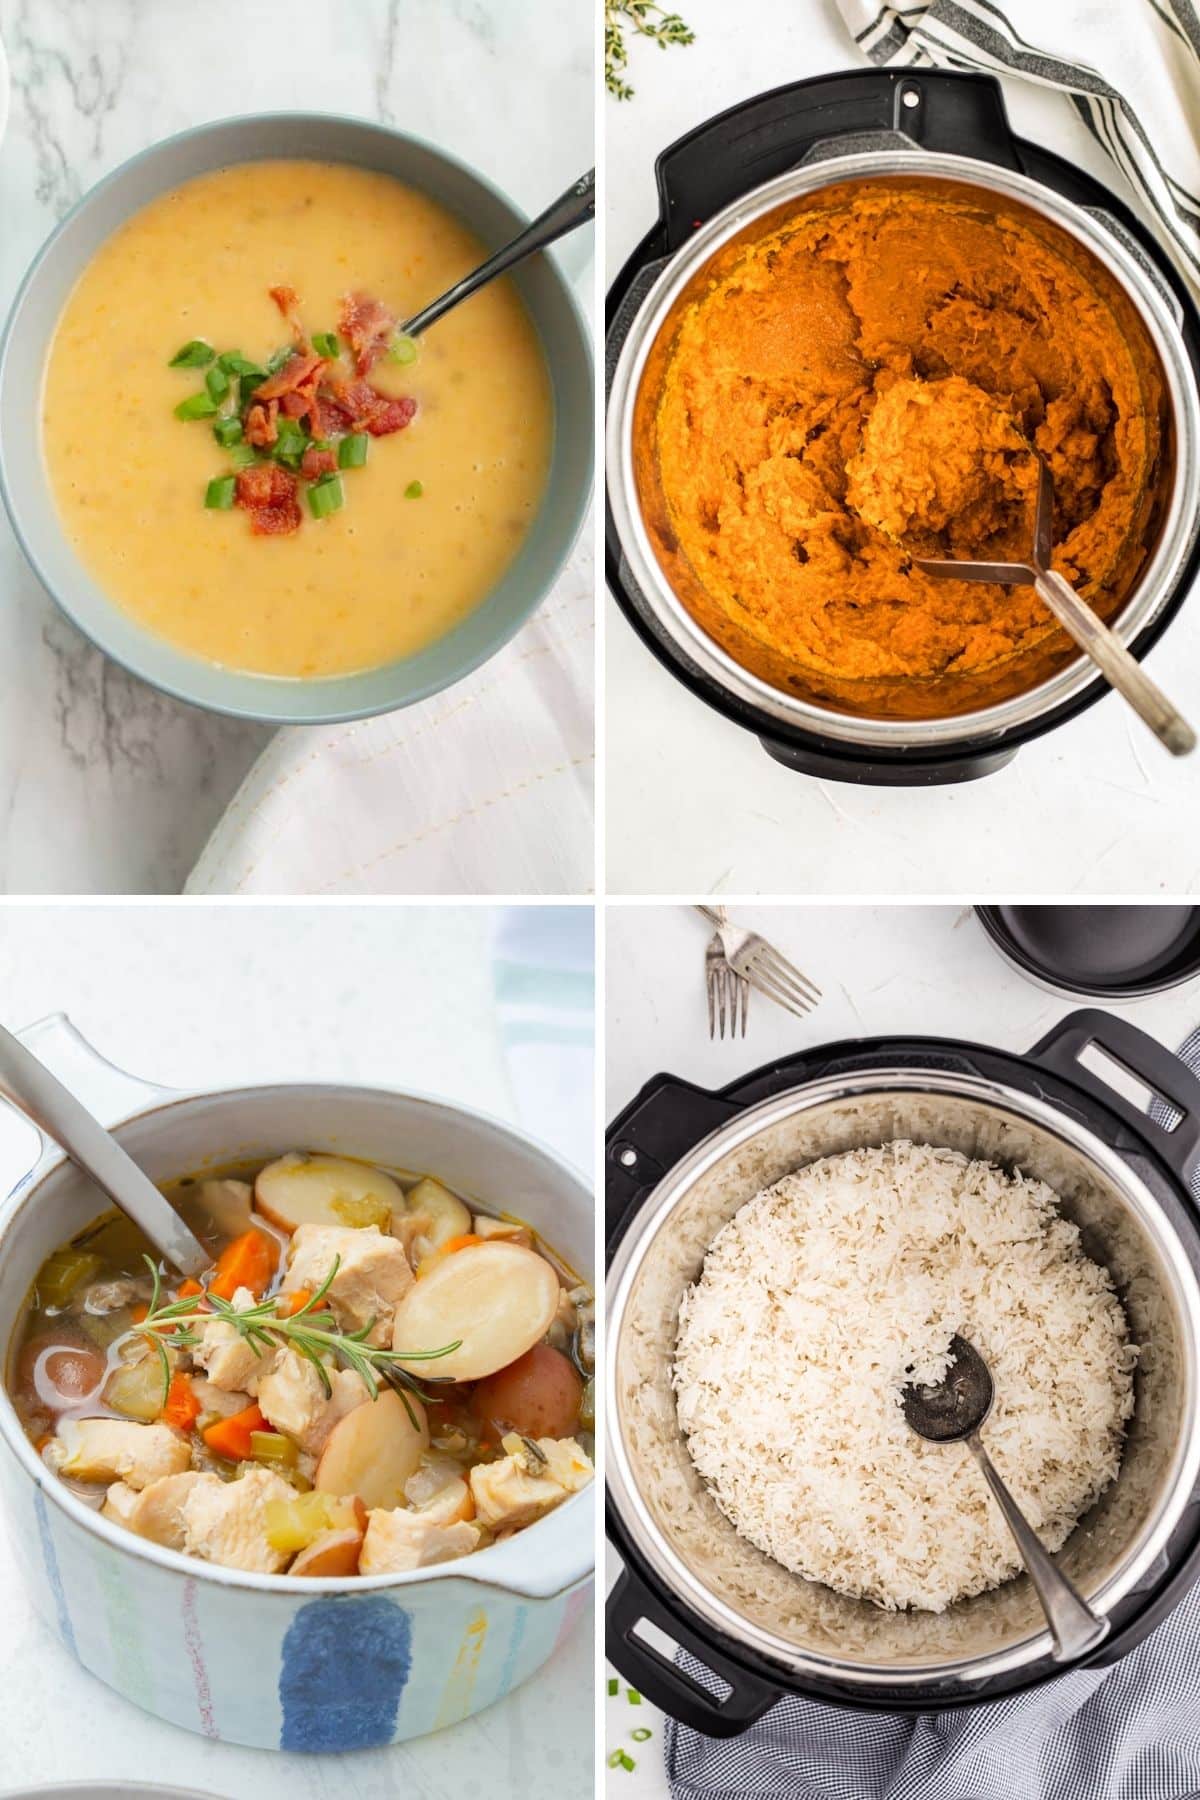 https://www.cleaneatingkitchen.com/wp-content/uploads/2022/04/instant-pot-recipes-for-beginners-collage.jpg